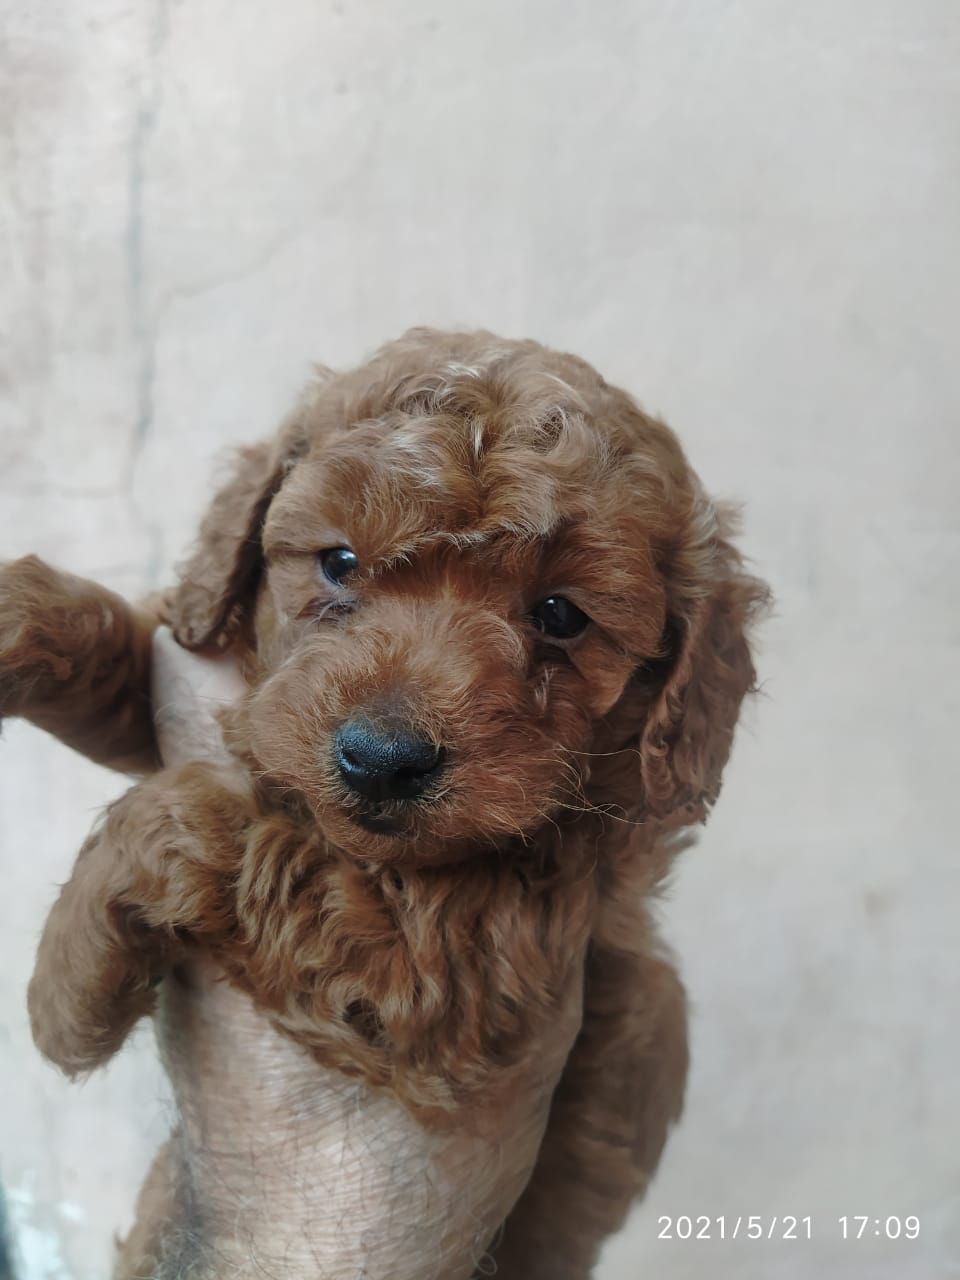 Image of POODLE posted on 2022-03-26 13:00:08 from Delhi